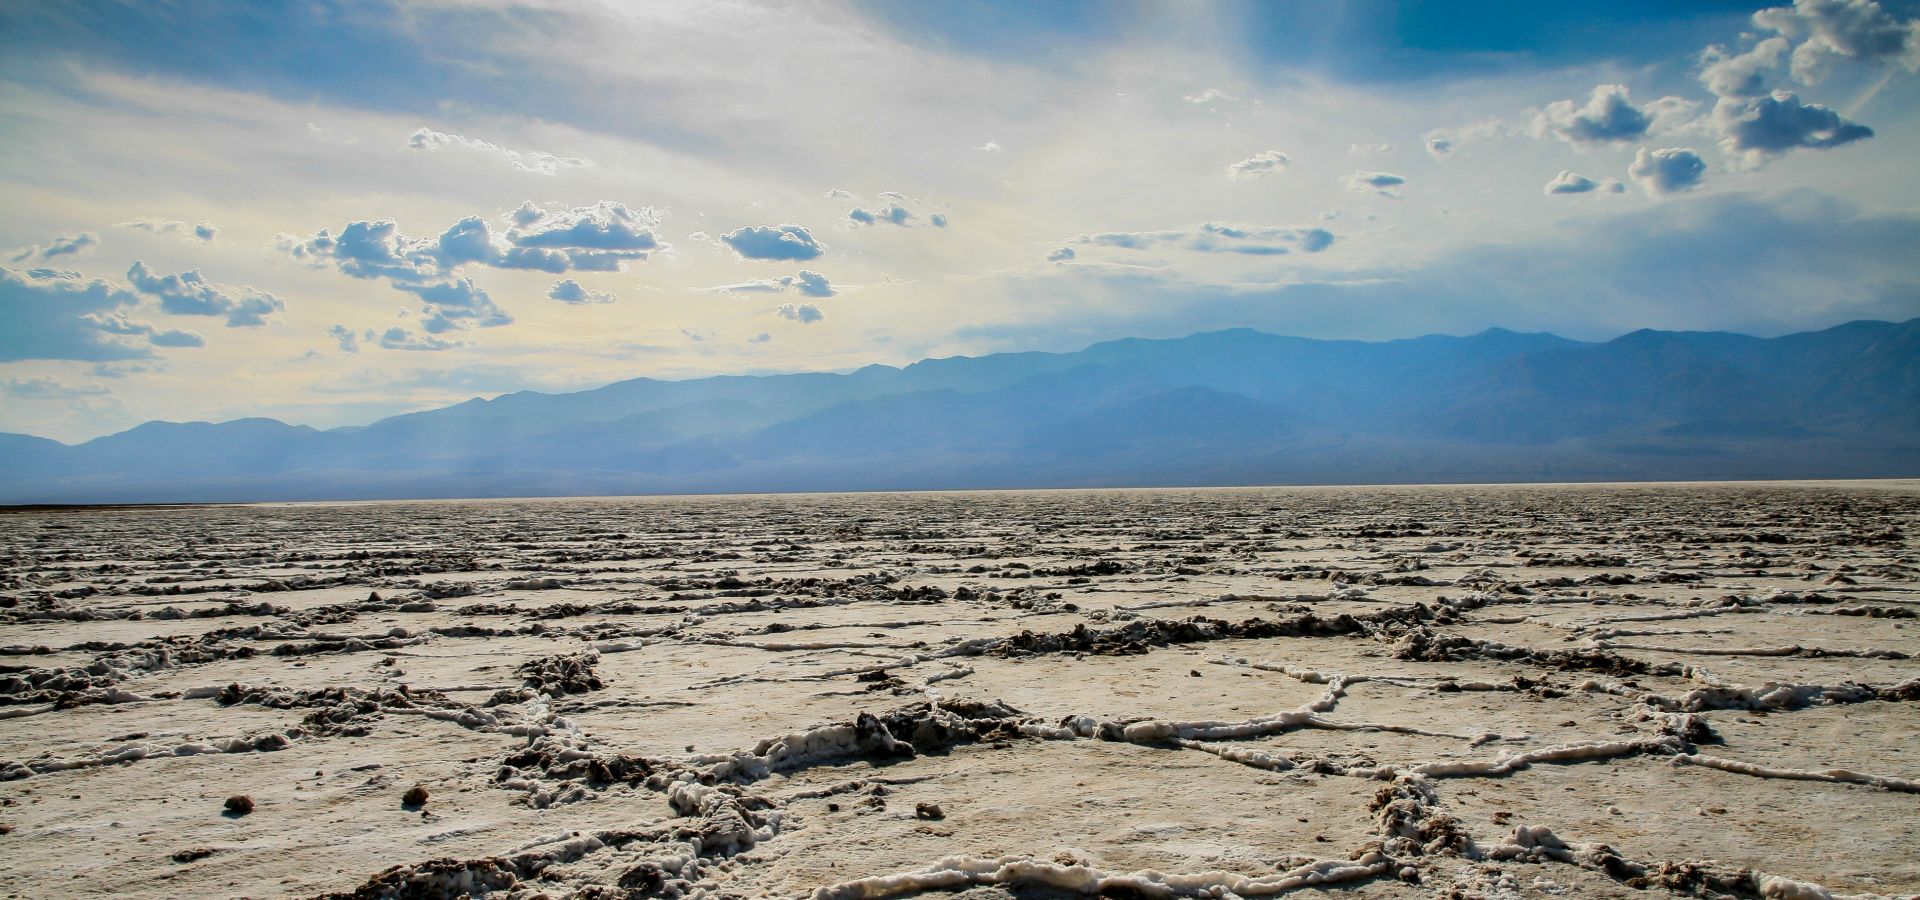 cracking crust of the death valley desert